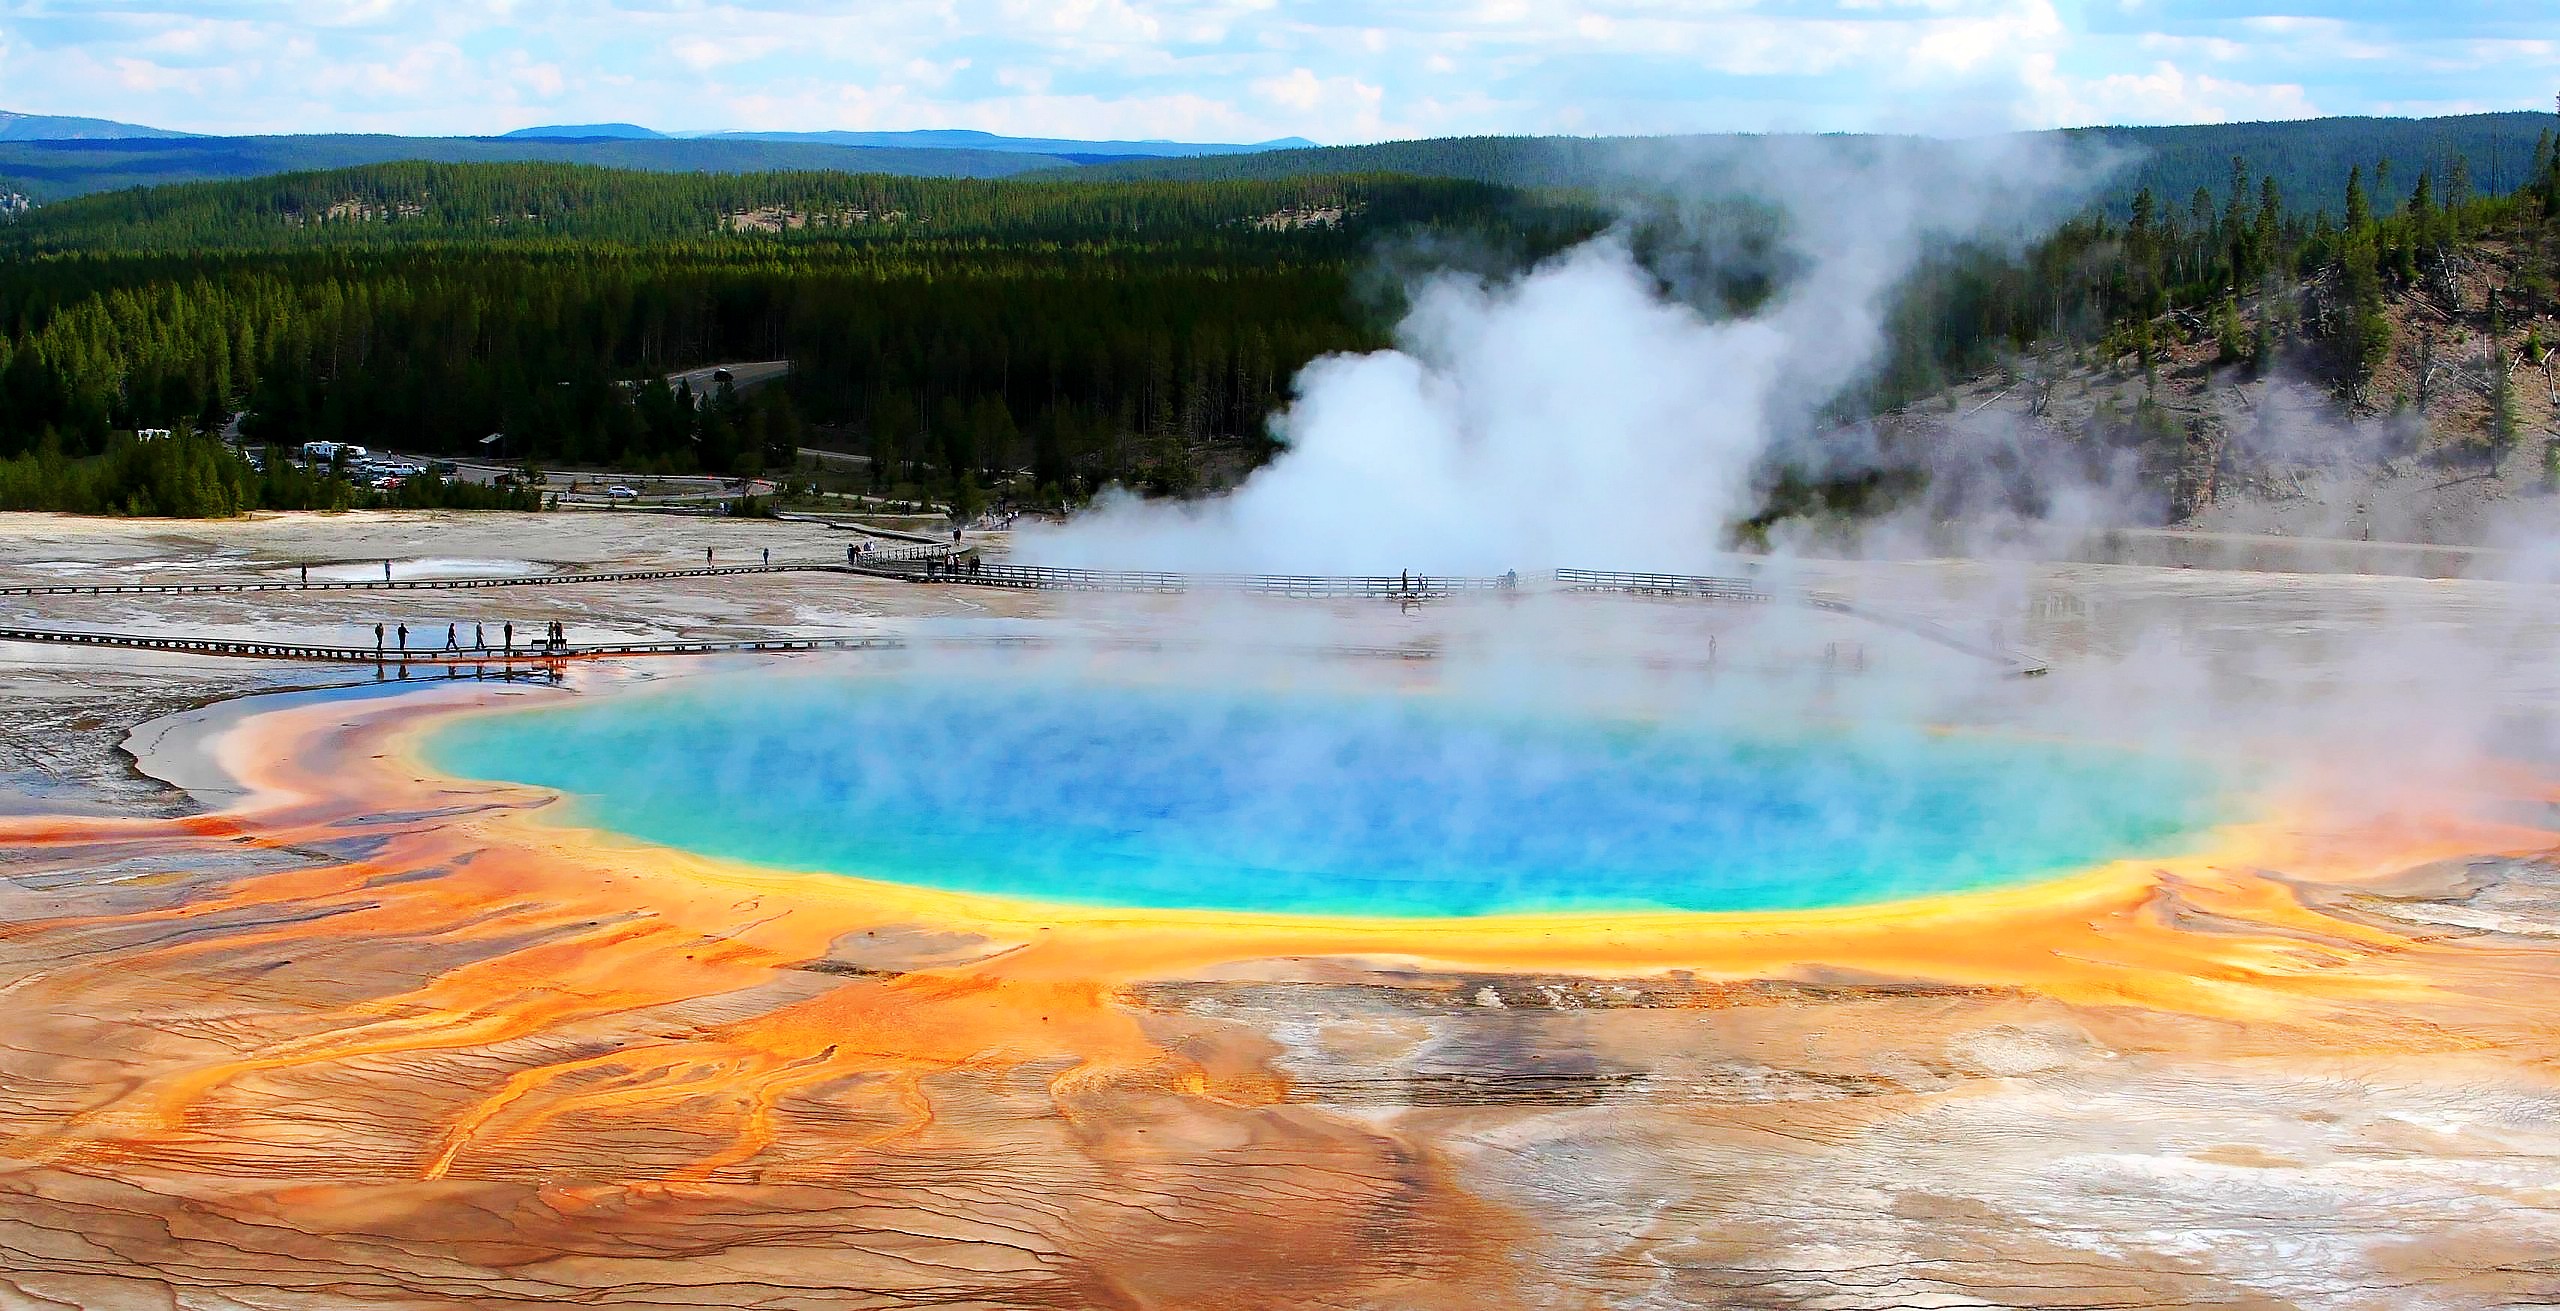 yellowstone-national-park-was-insanely-busy-this-summer-breaks